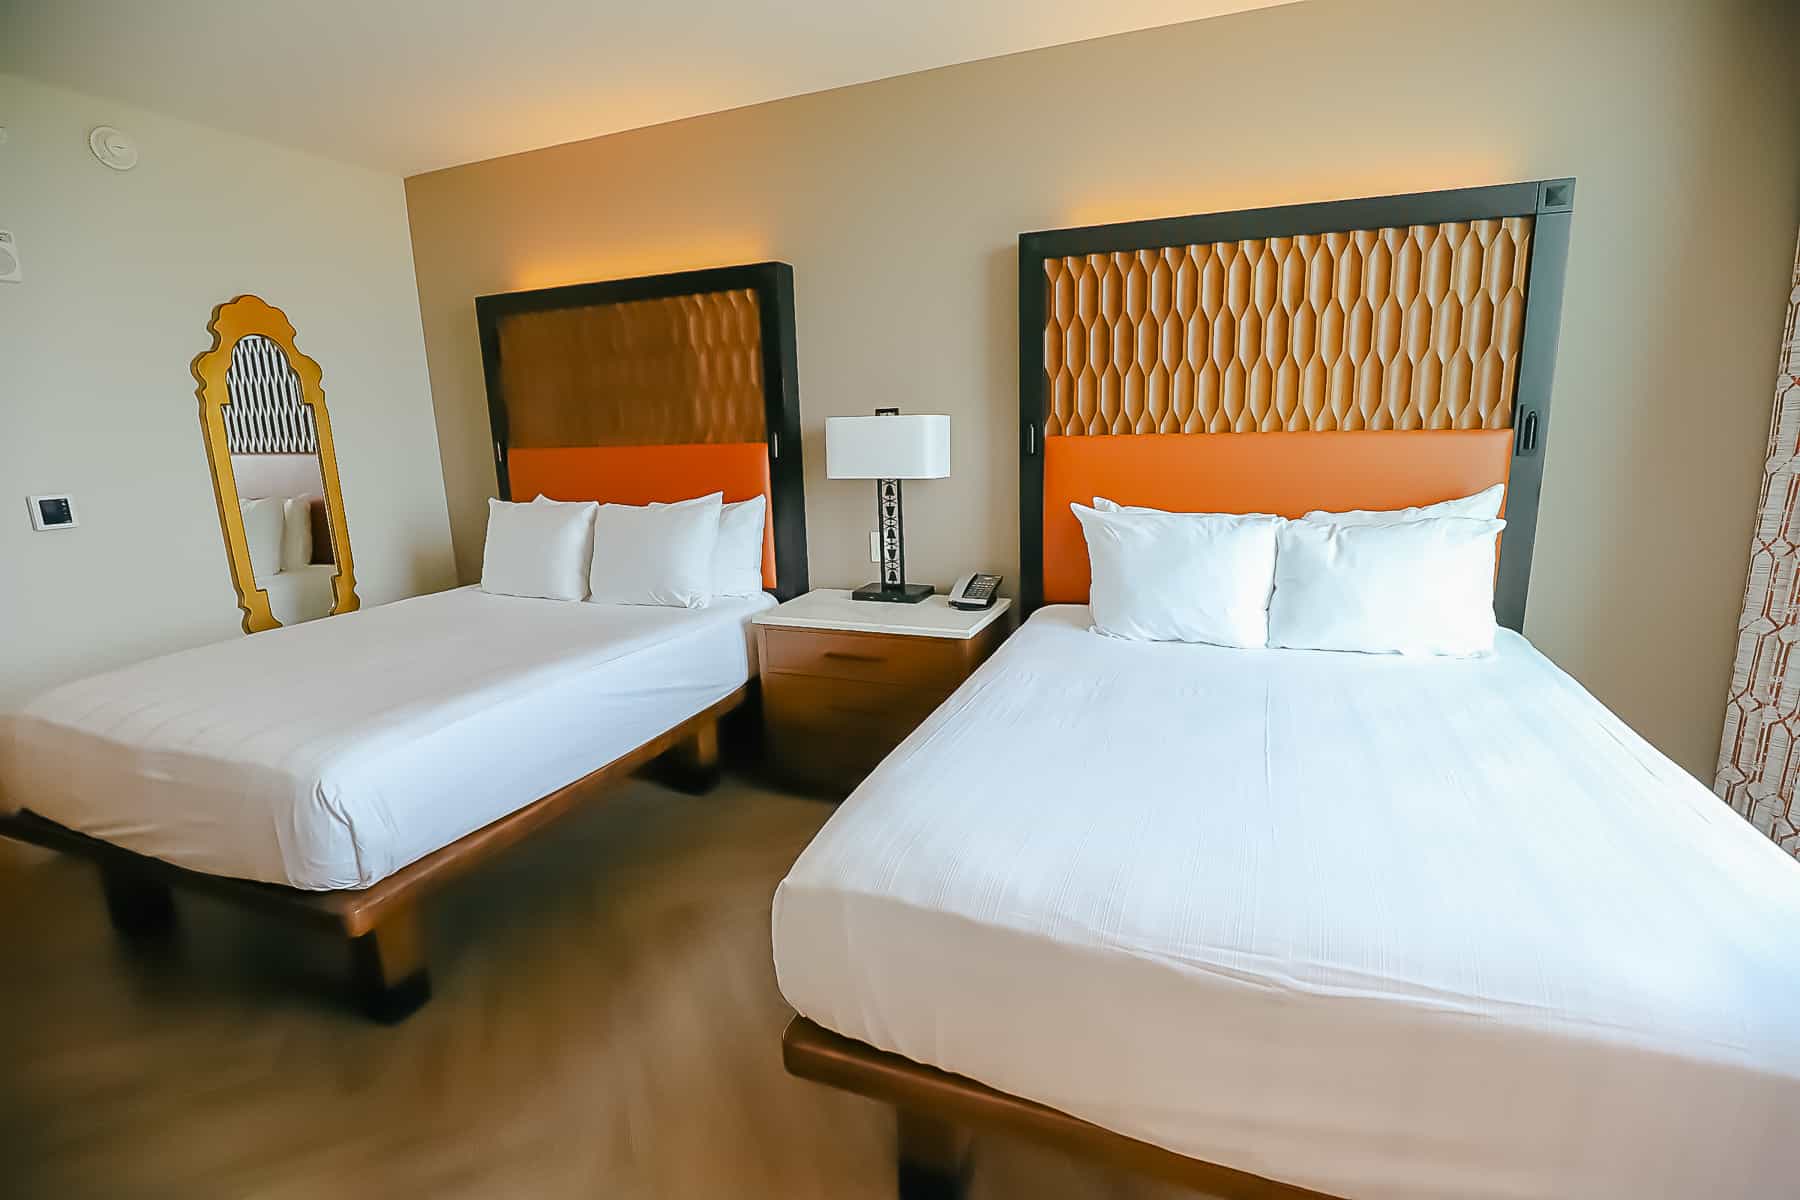 Standard rooms in Gran Destino Tower have two queen beds. 